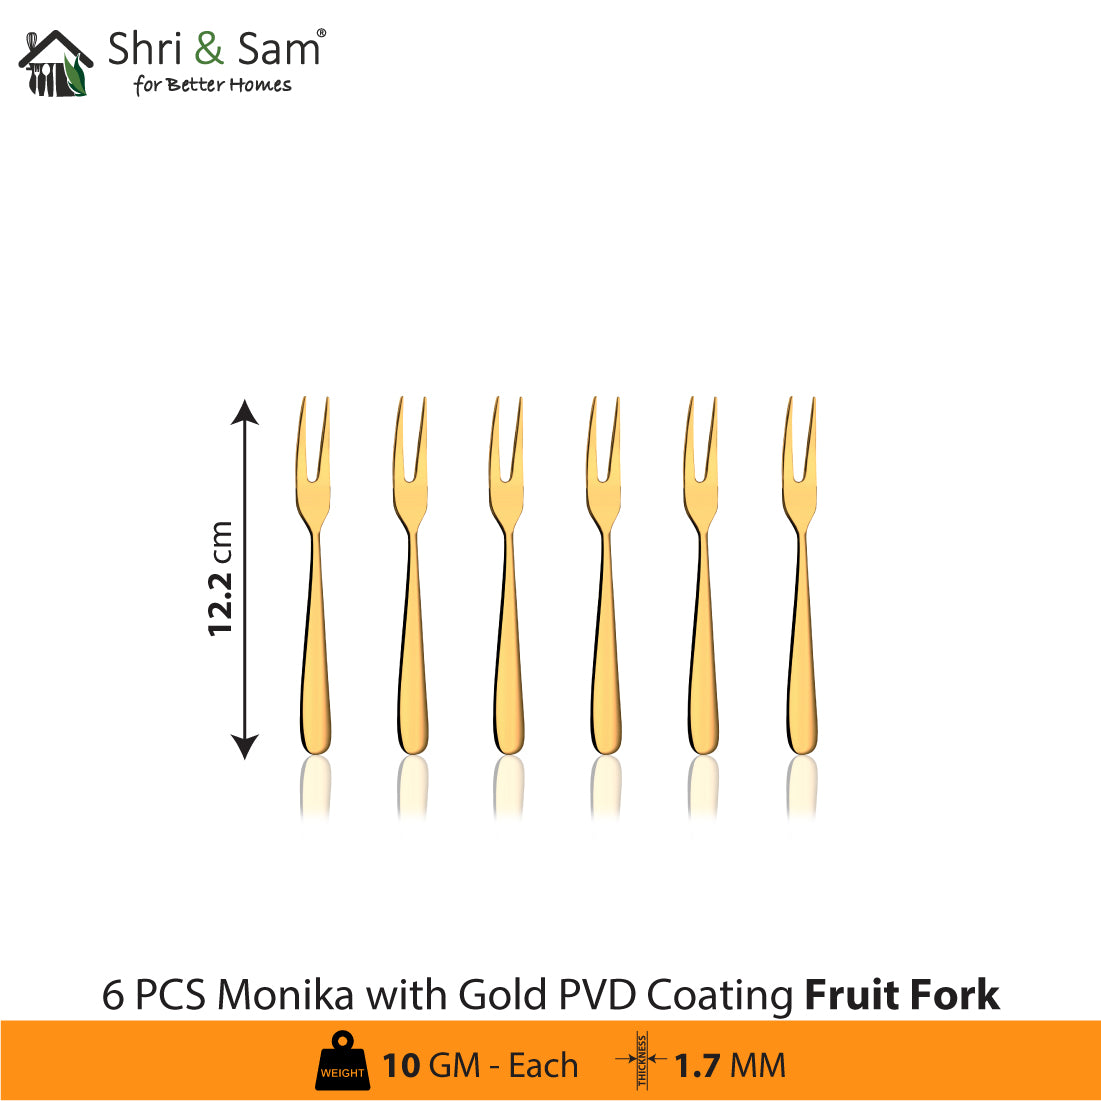 Stainless Steel Cutlery with Gold PVD Coating Monika